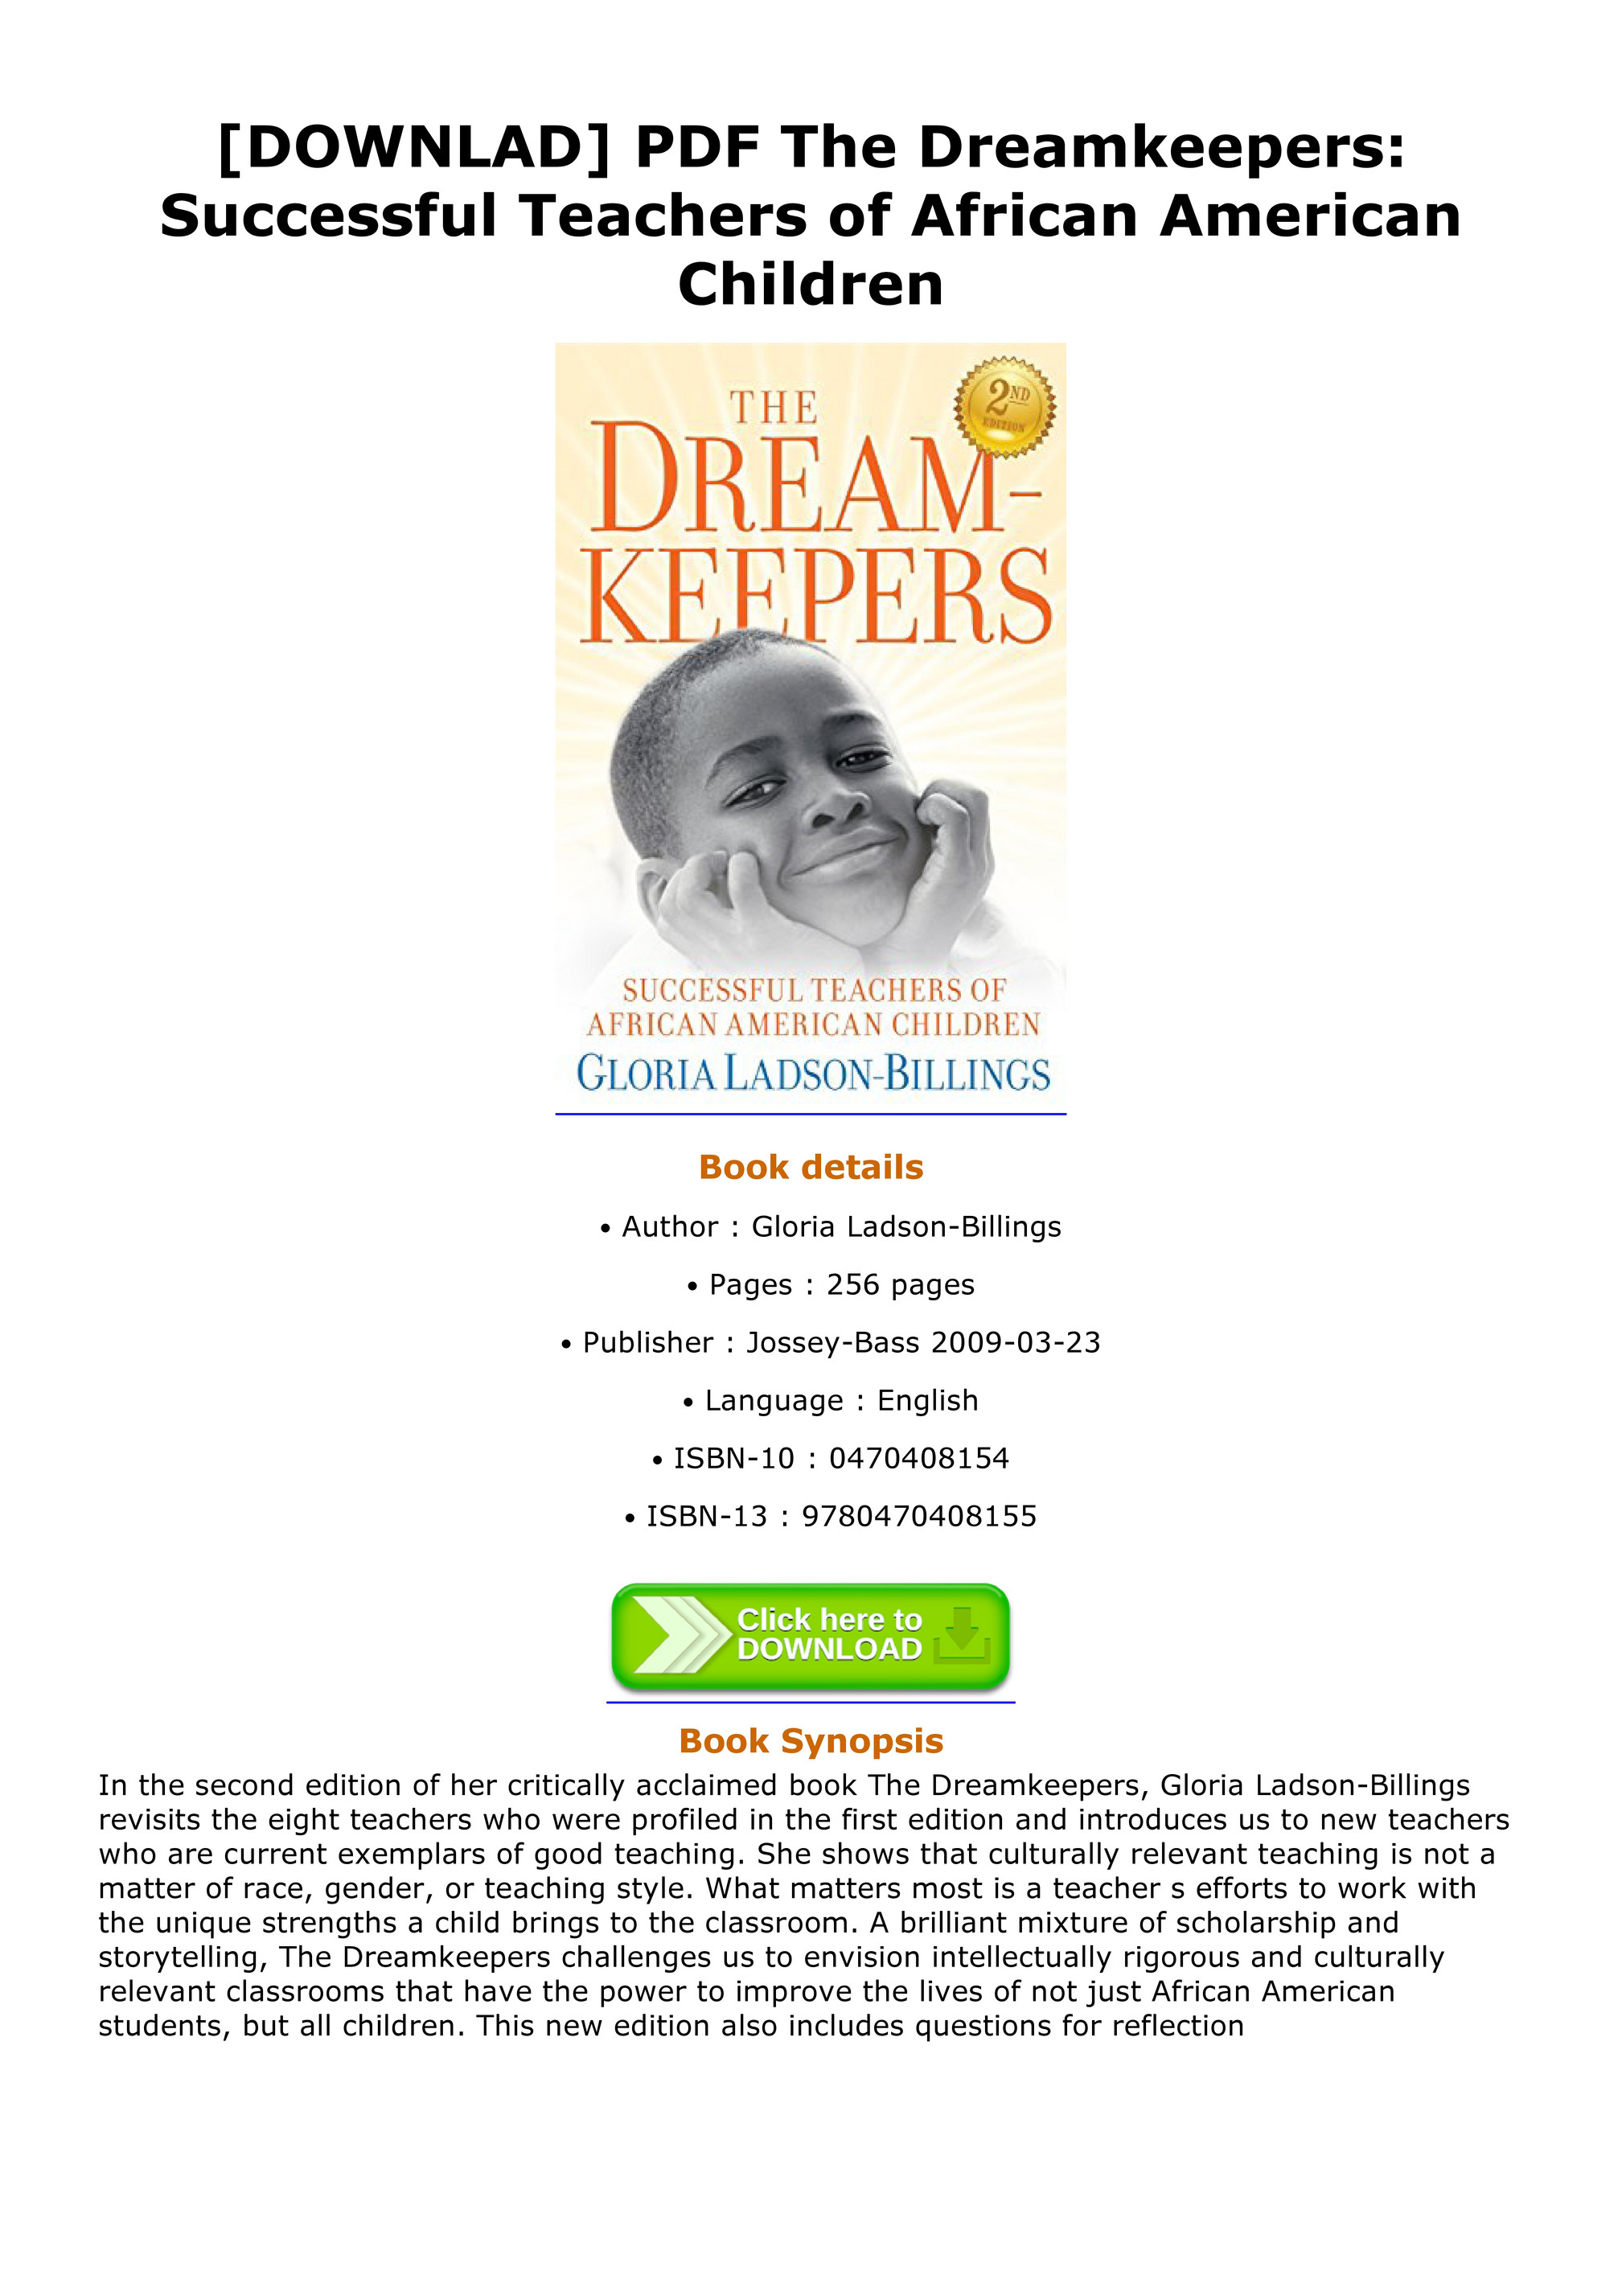 The dreamkeepers pdf